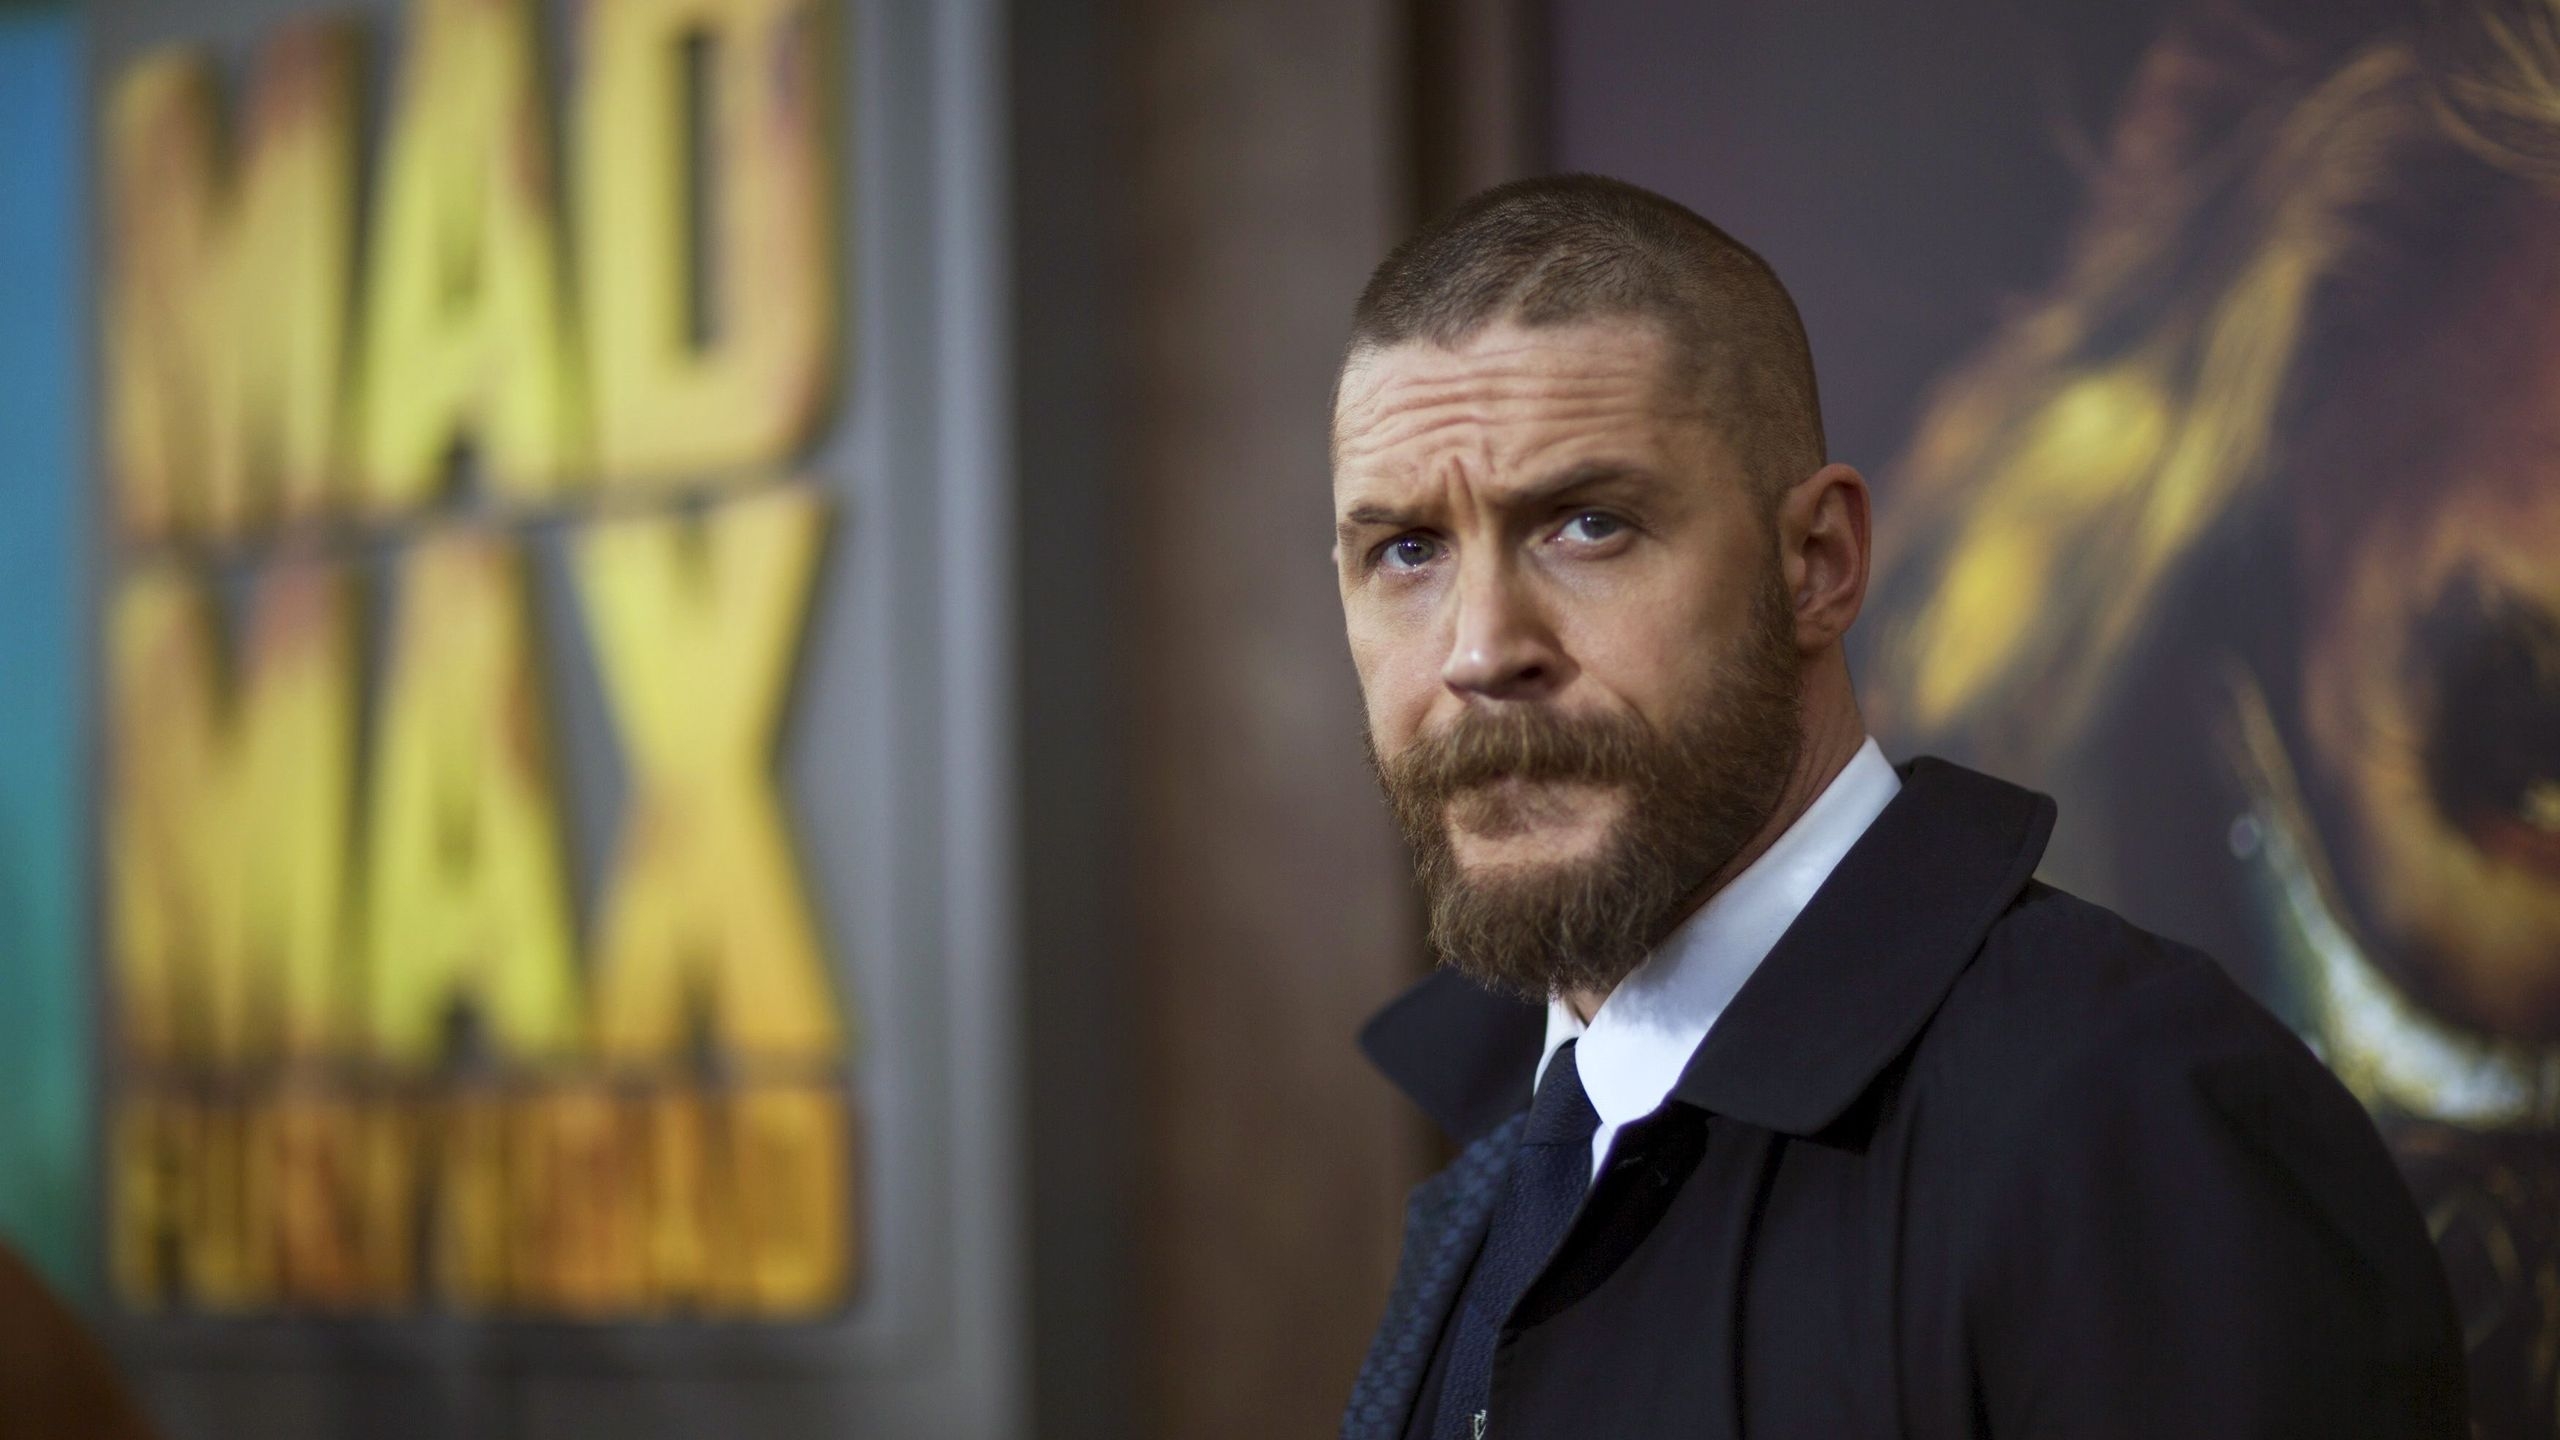 Tom Hardy 2016 New Look for 2560x1440 HDTV resolution